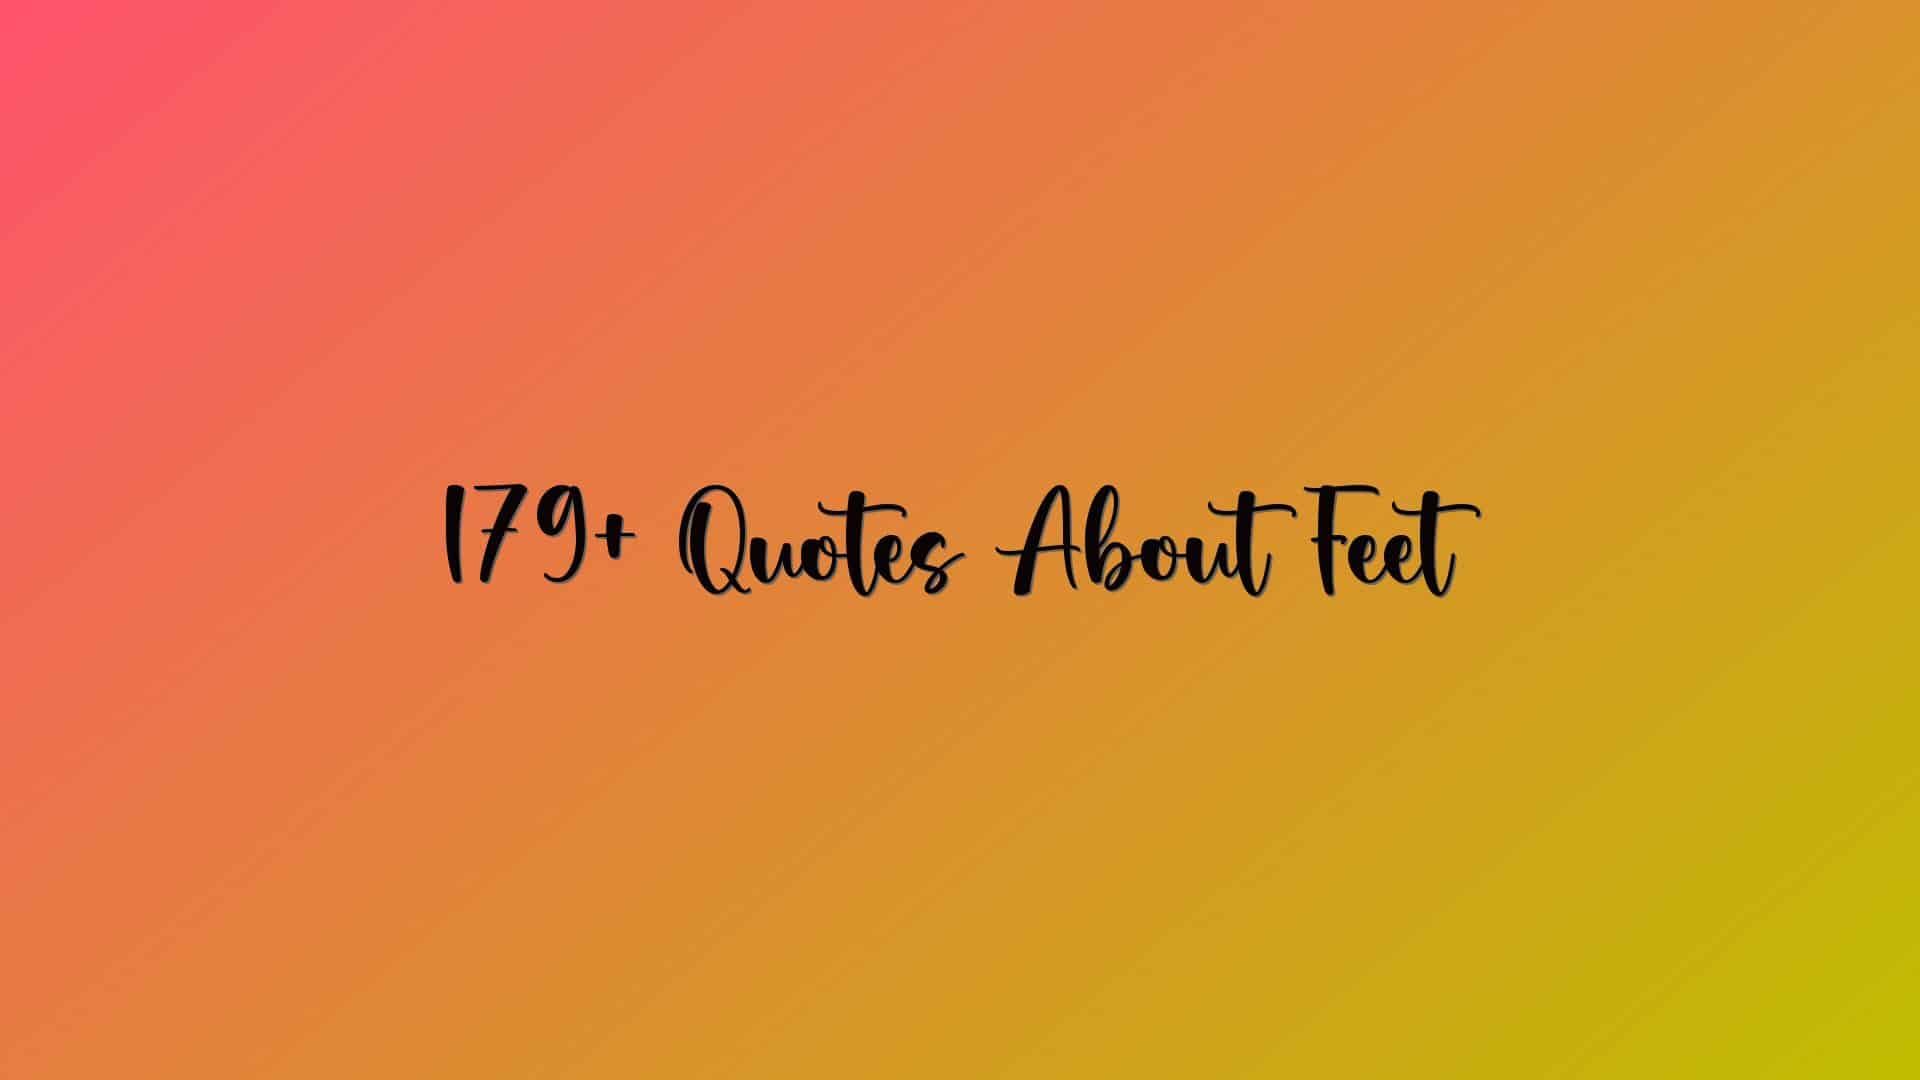 179+ Quotes About Feet